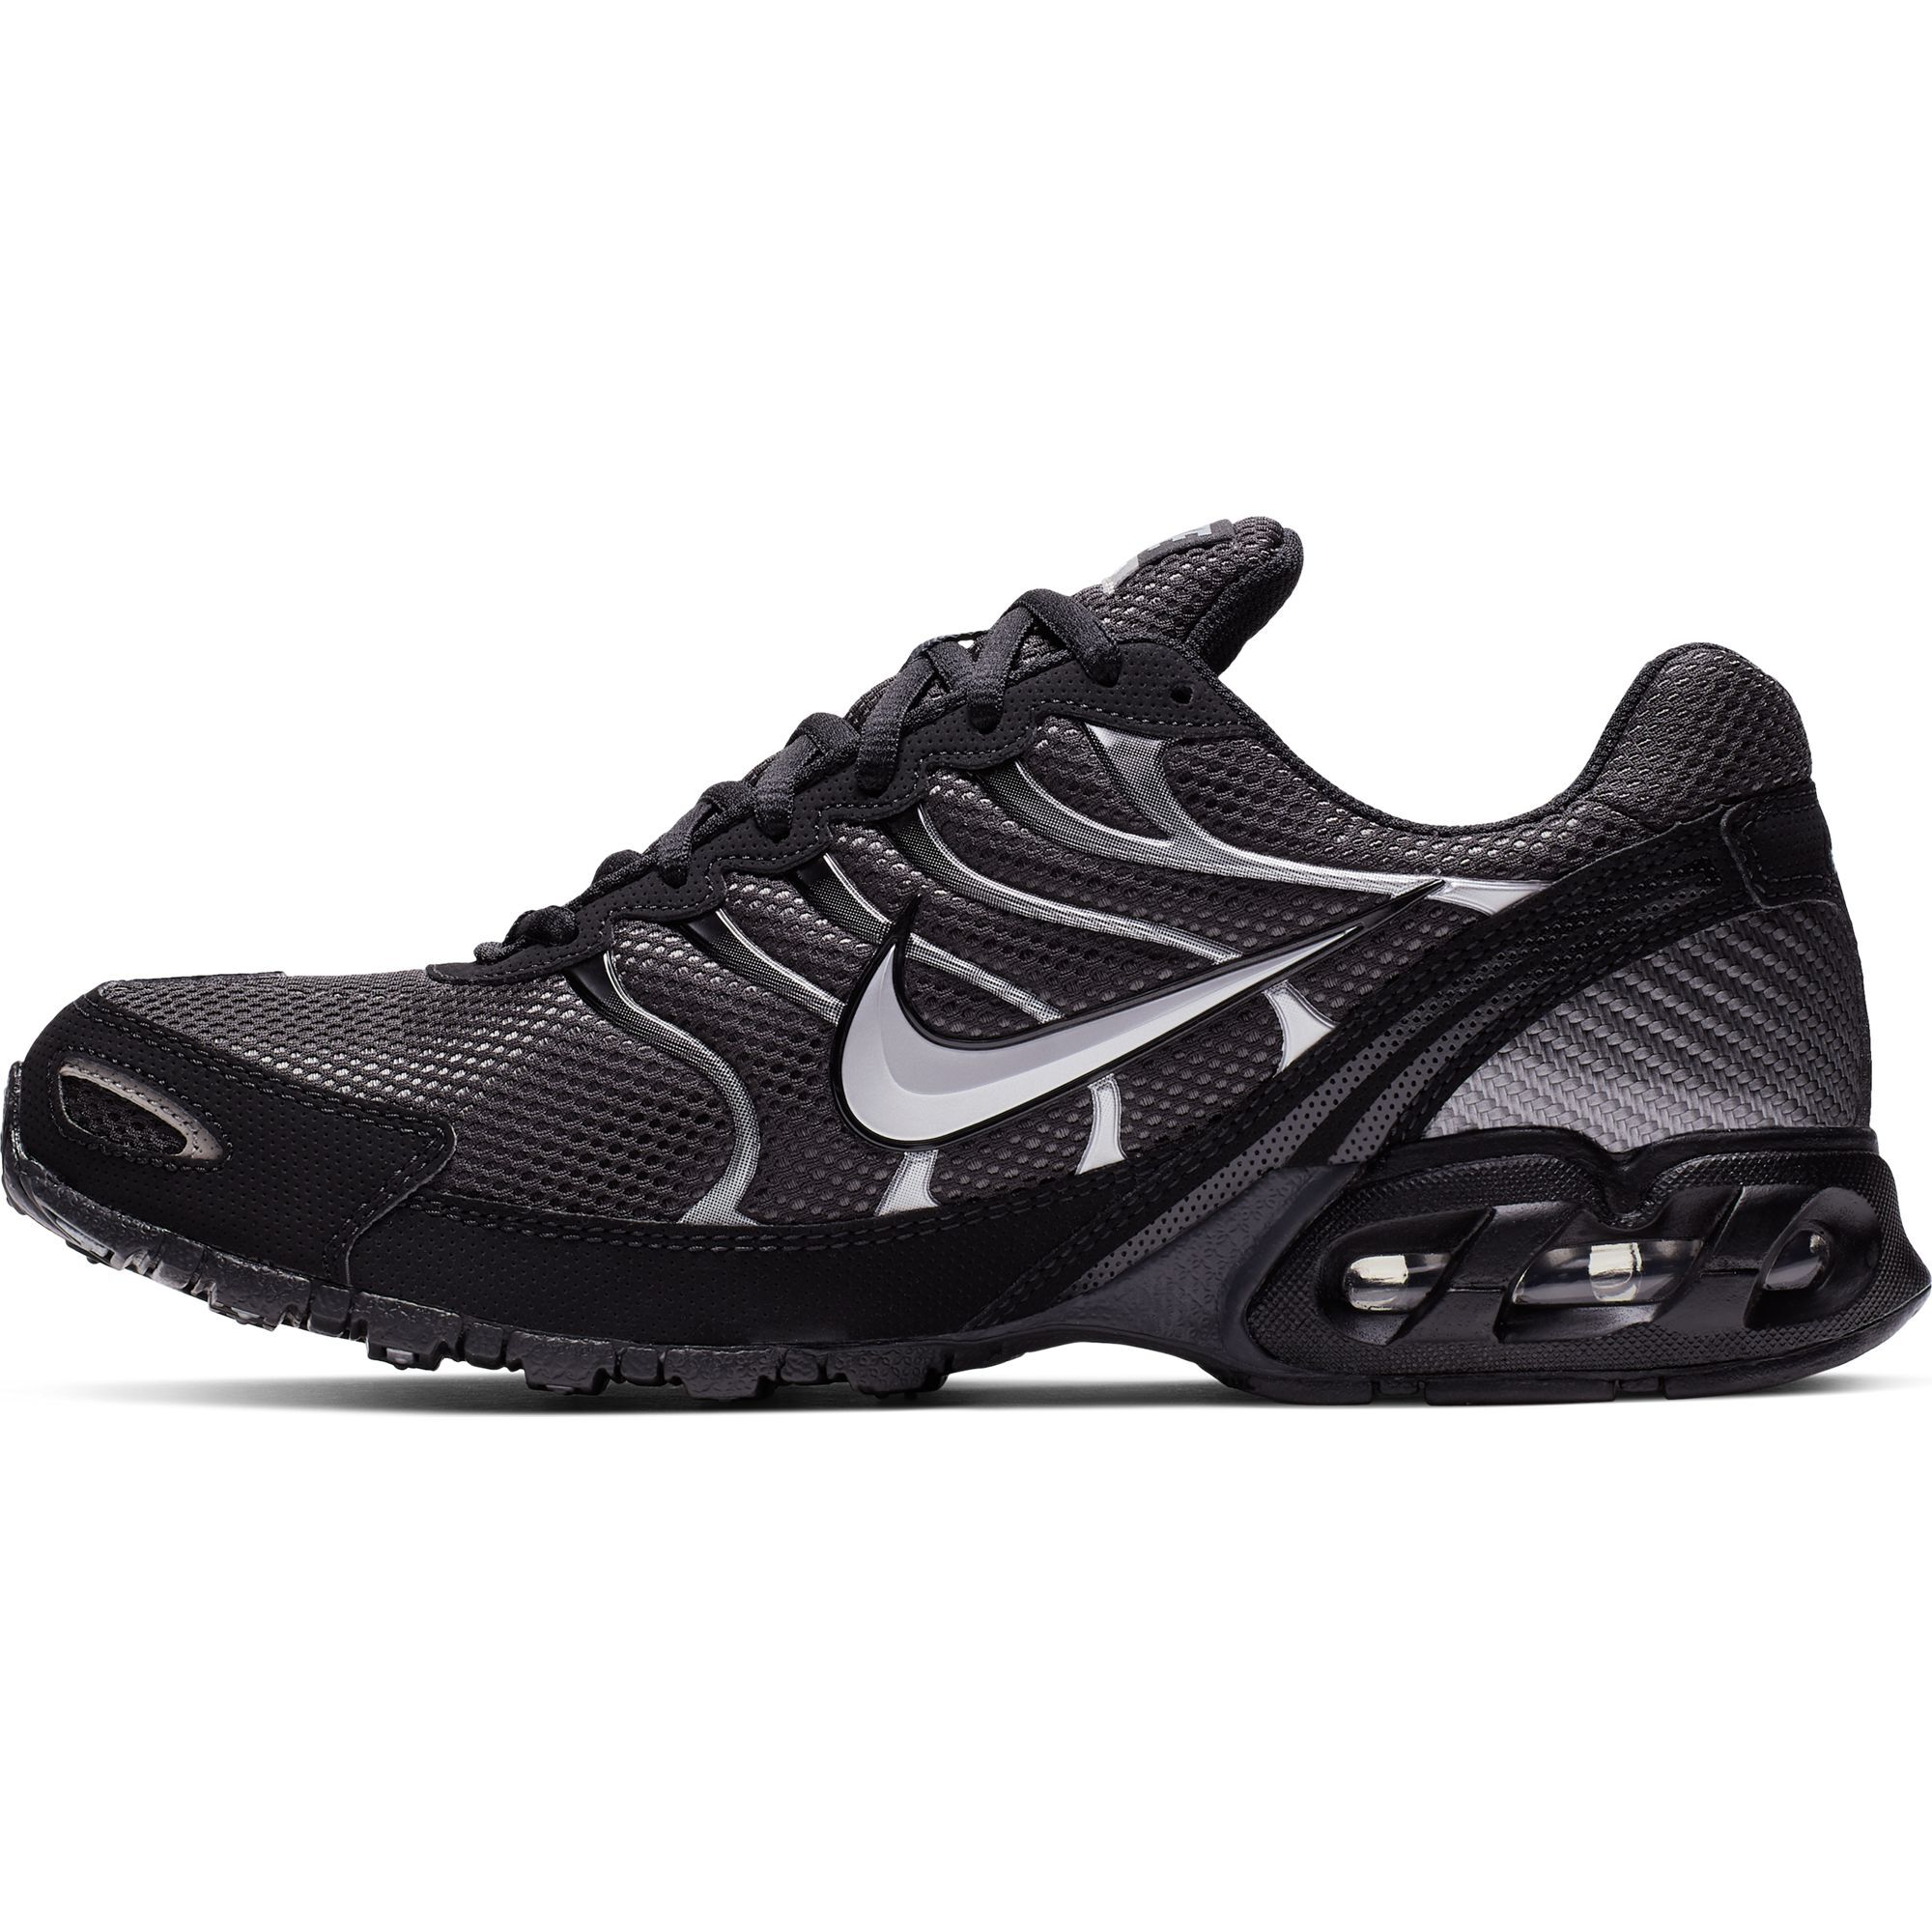 nike women's air max torch 4 running sneakers from finish line